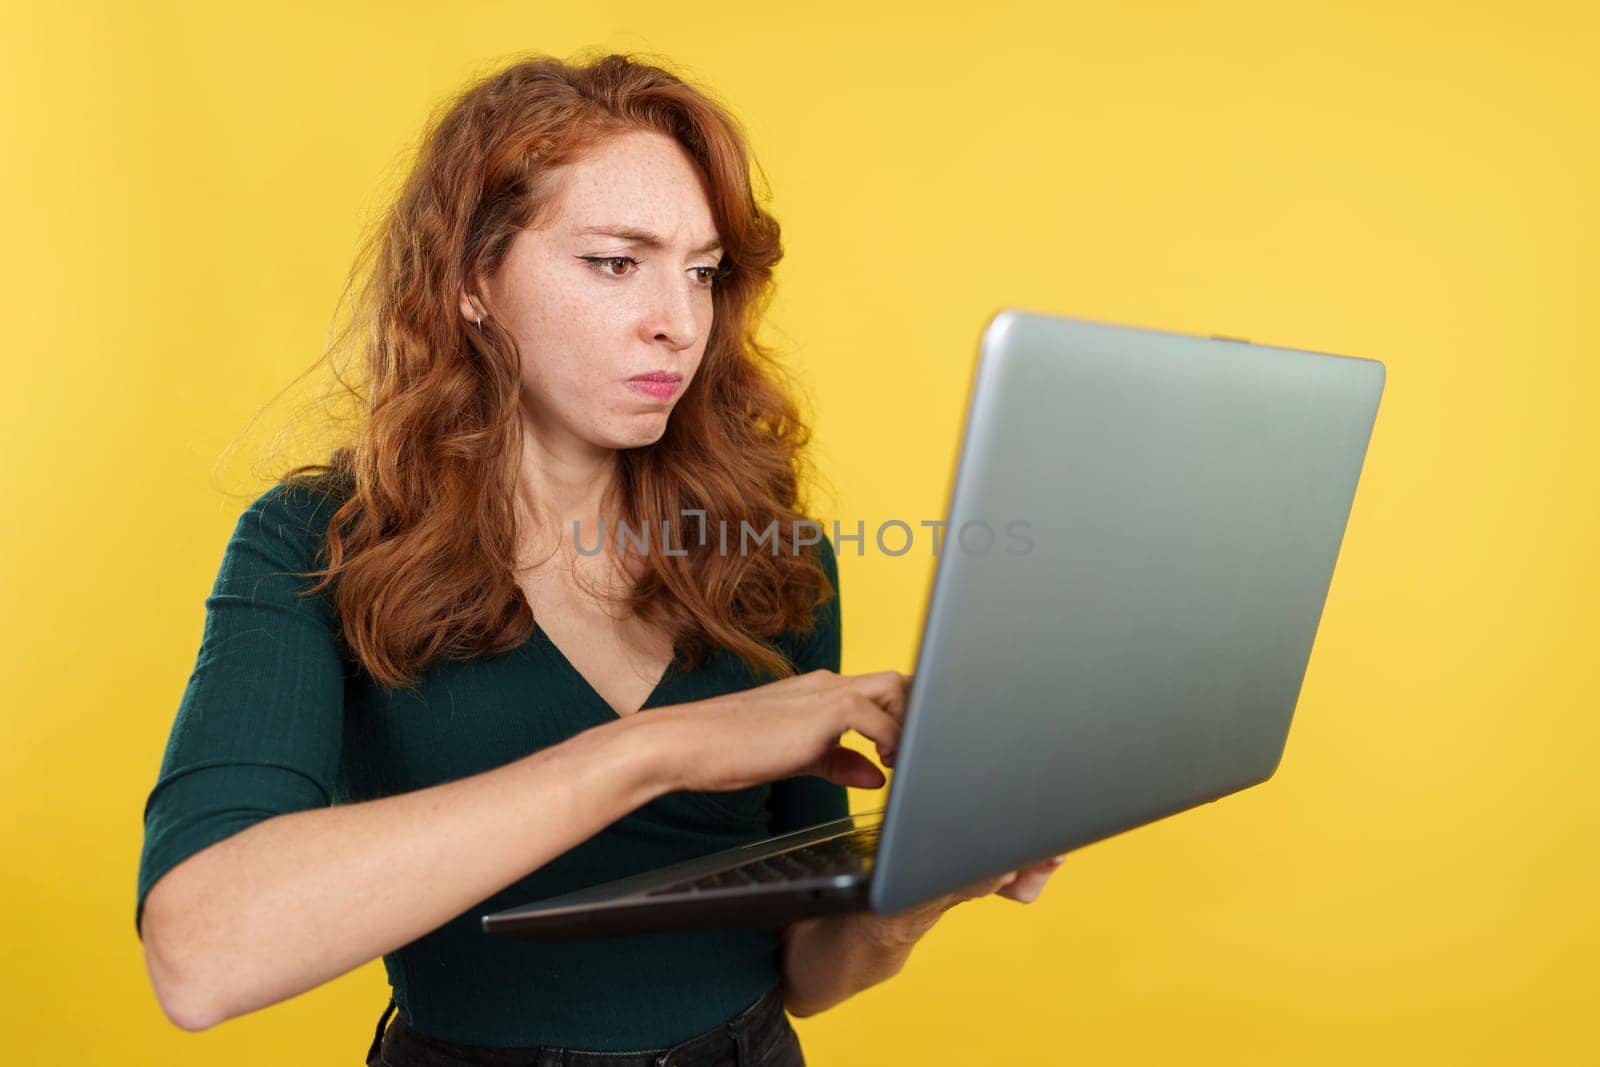 Redheaded woman having a problem with a laptop in studio with yellow background